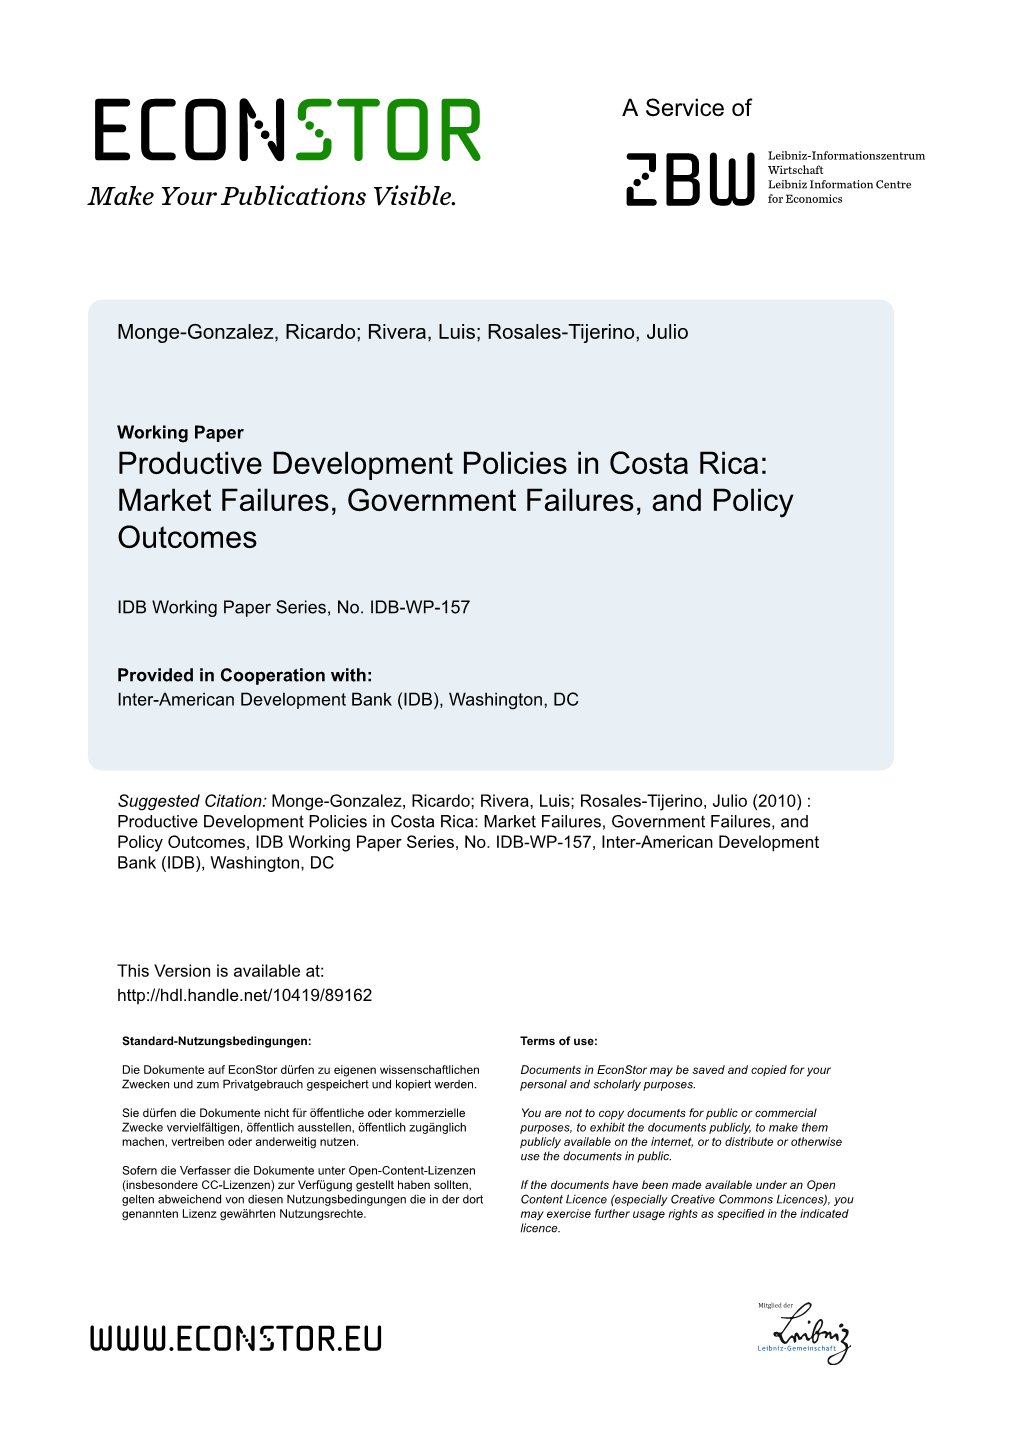 Productive Development Policies in Costa Rica: Market Failures, Government Failures, and Policy Outcomes